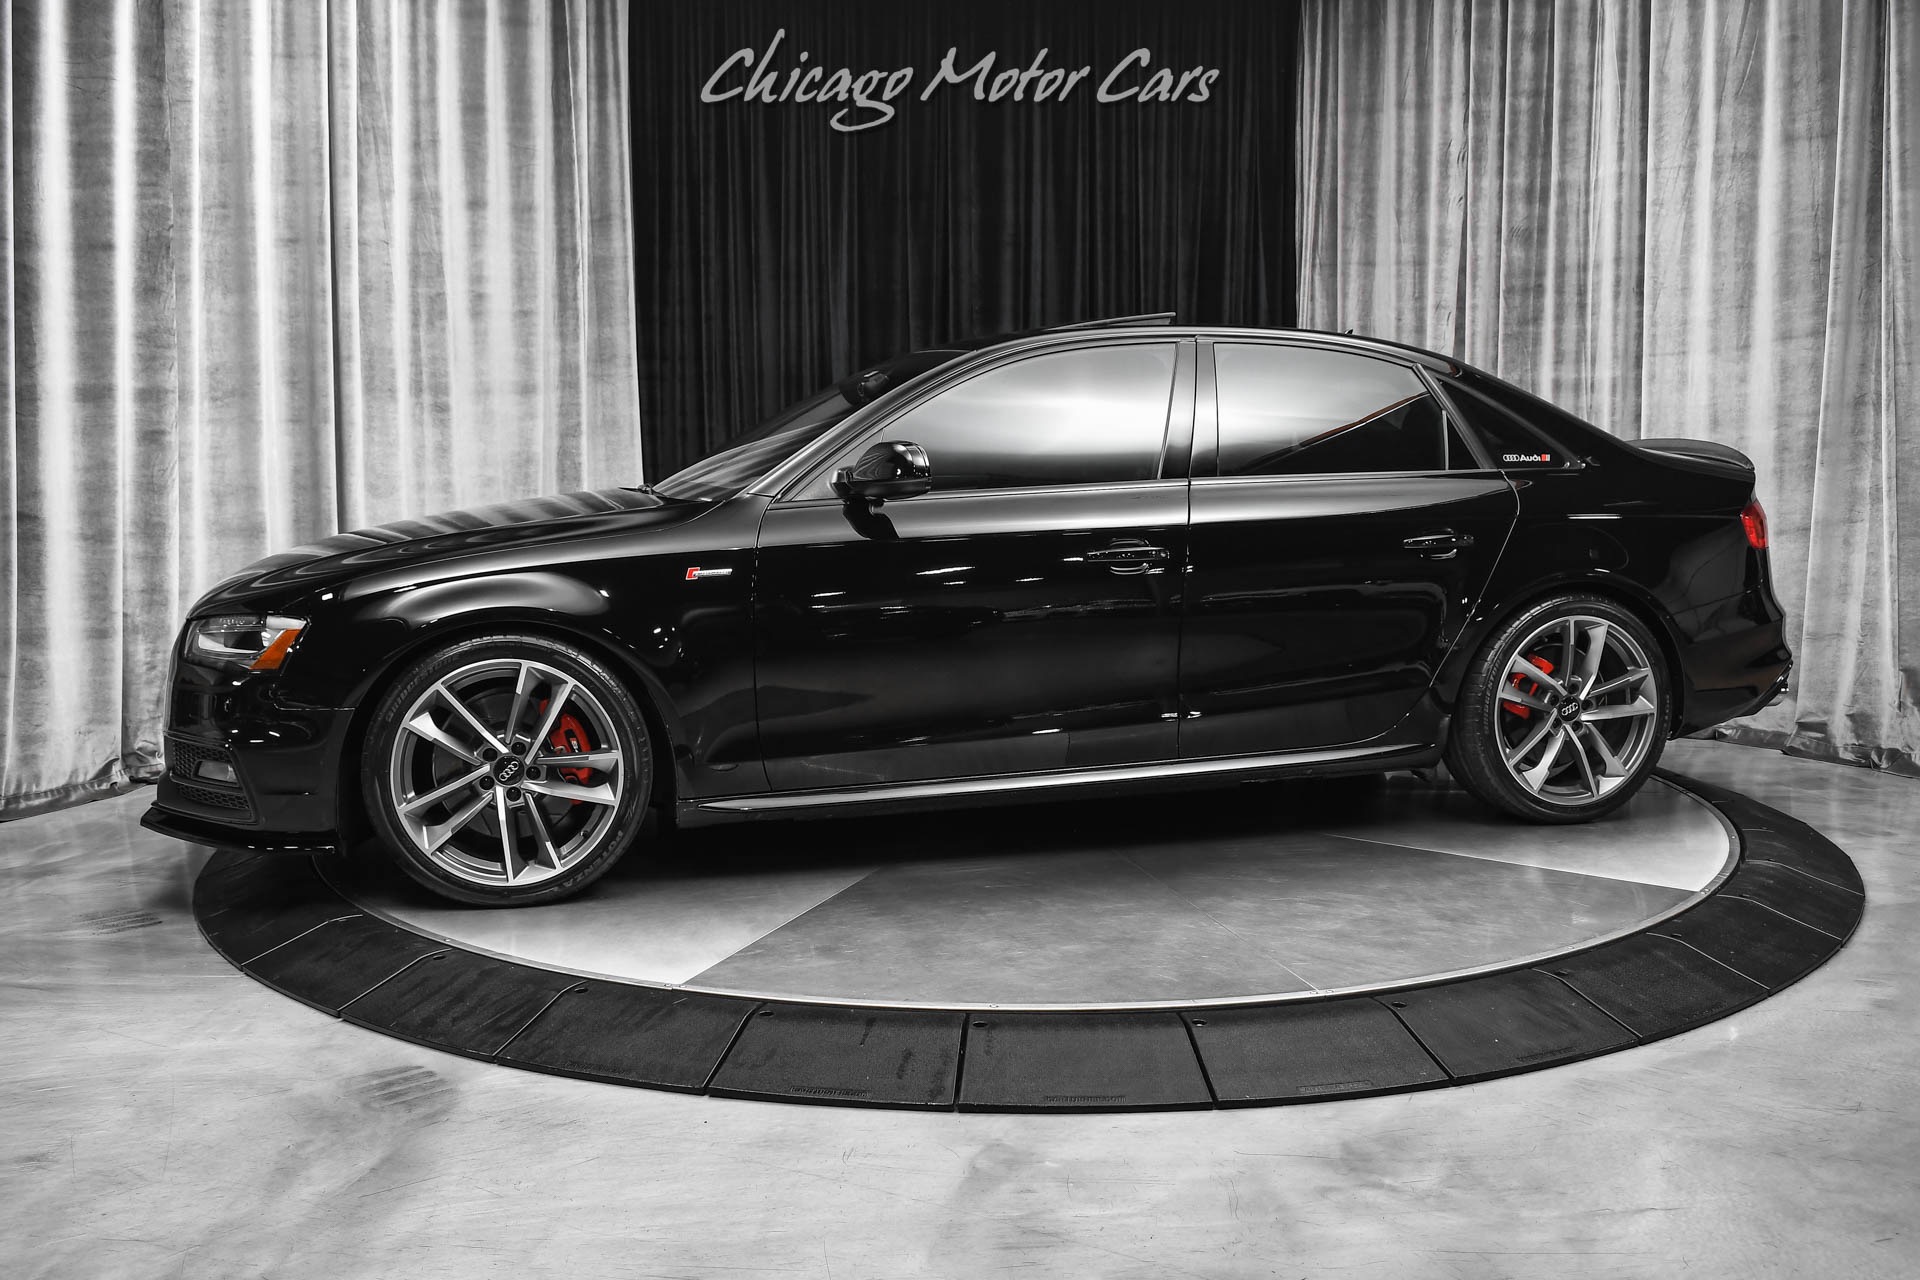 Used 2014 Audi S4 3.0T quattro Premium Plus EPL STAGE 2! Black Optics Pkg!  B&O! LOADED For Sale (Special Pricing) | Chicago Motor Cars Stock #19173D